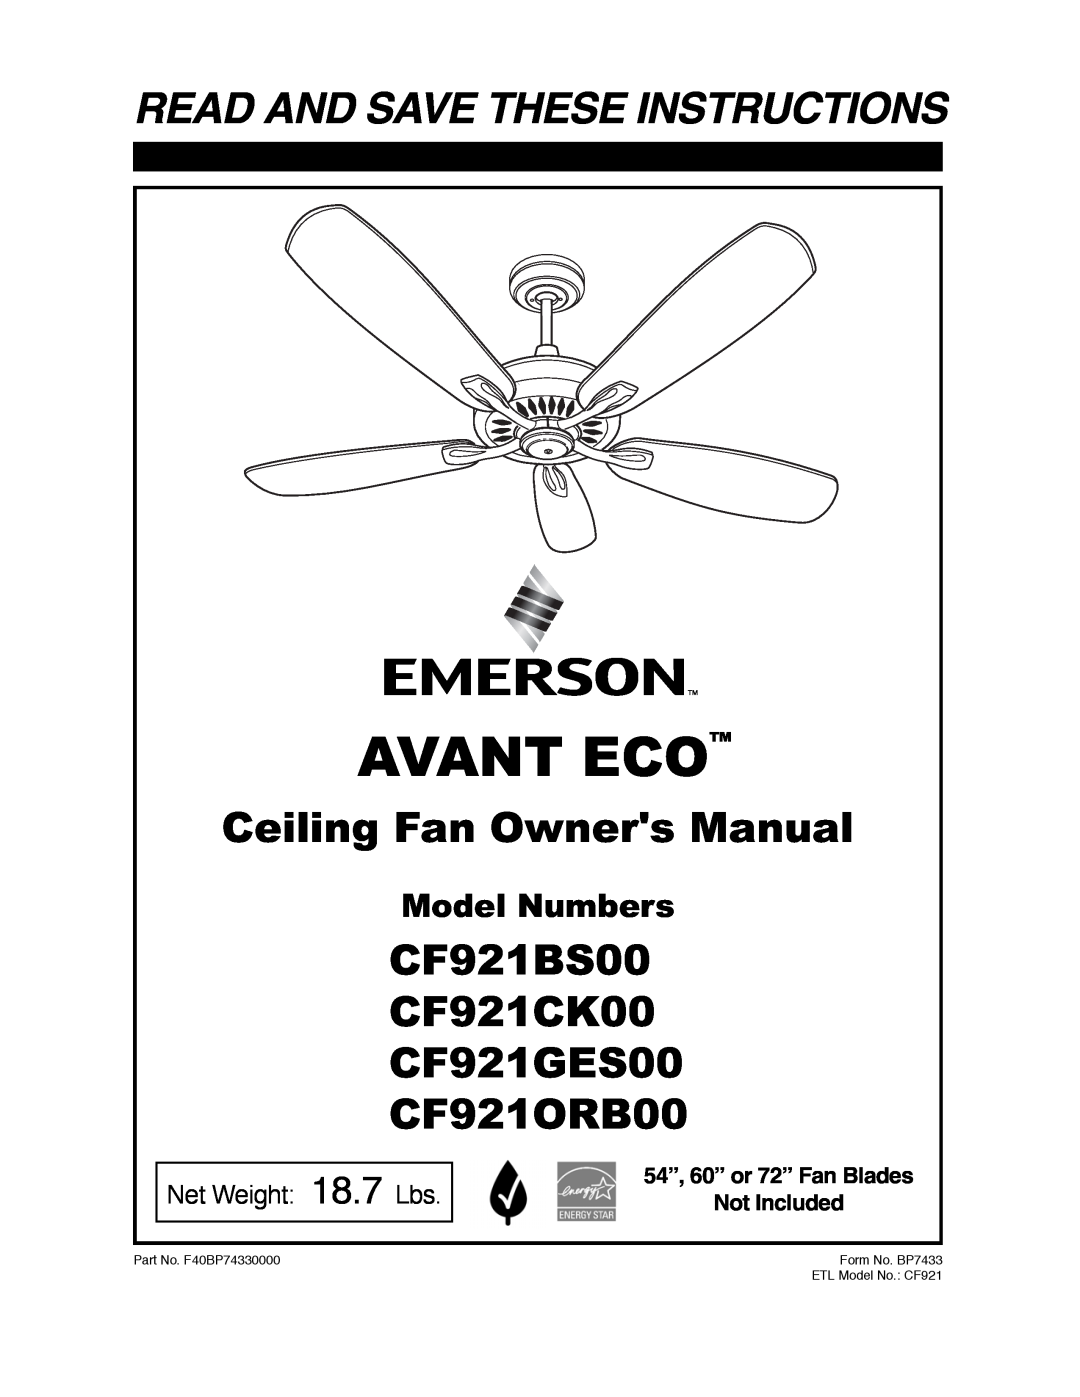 Electrolux CF921GES00 owner manual 54”, 60” or 72” Fan Blades Not Included, Avant Eco, Read And Save These Instructions 